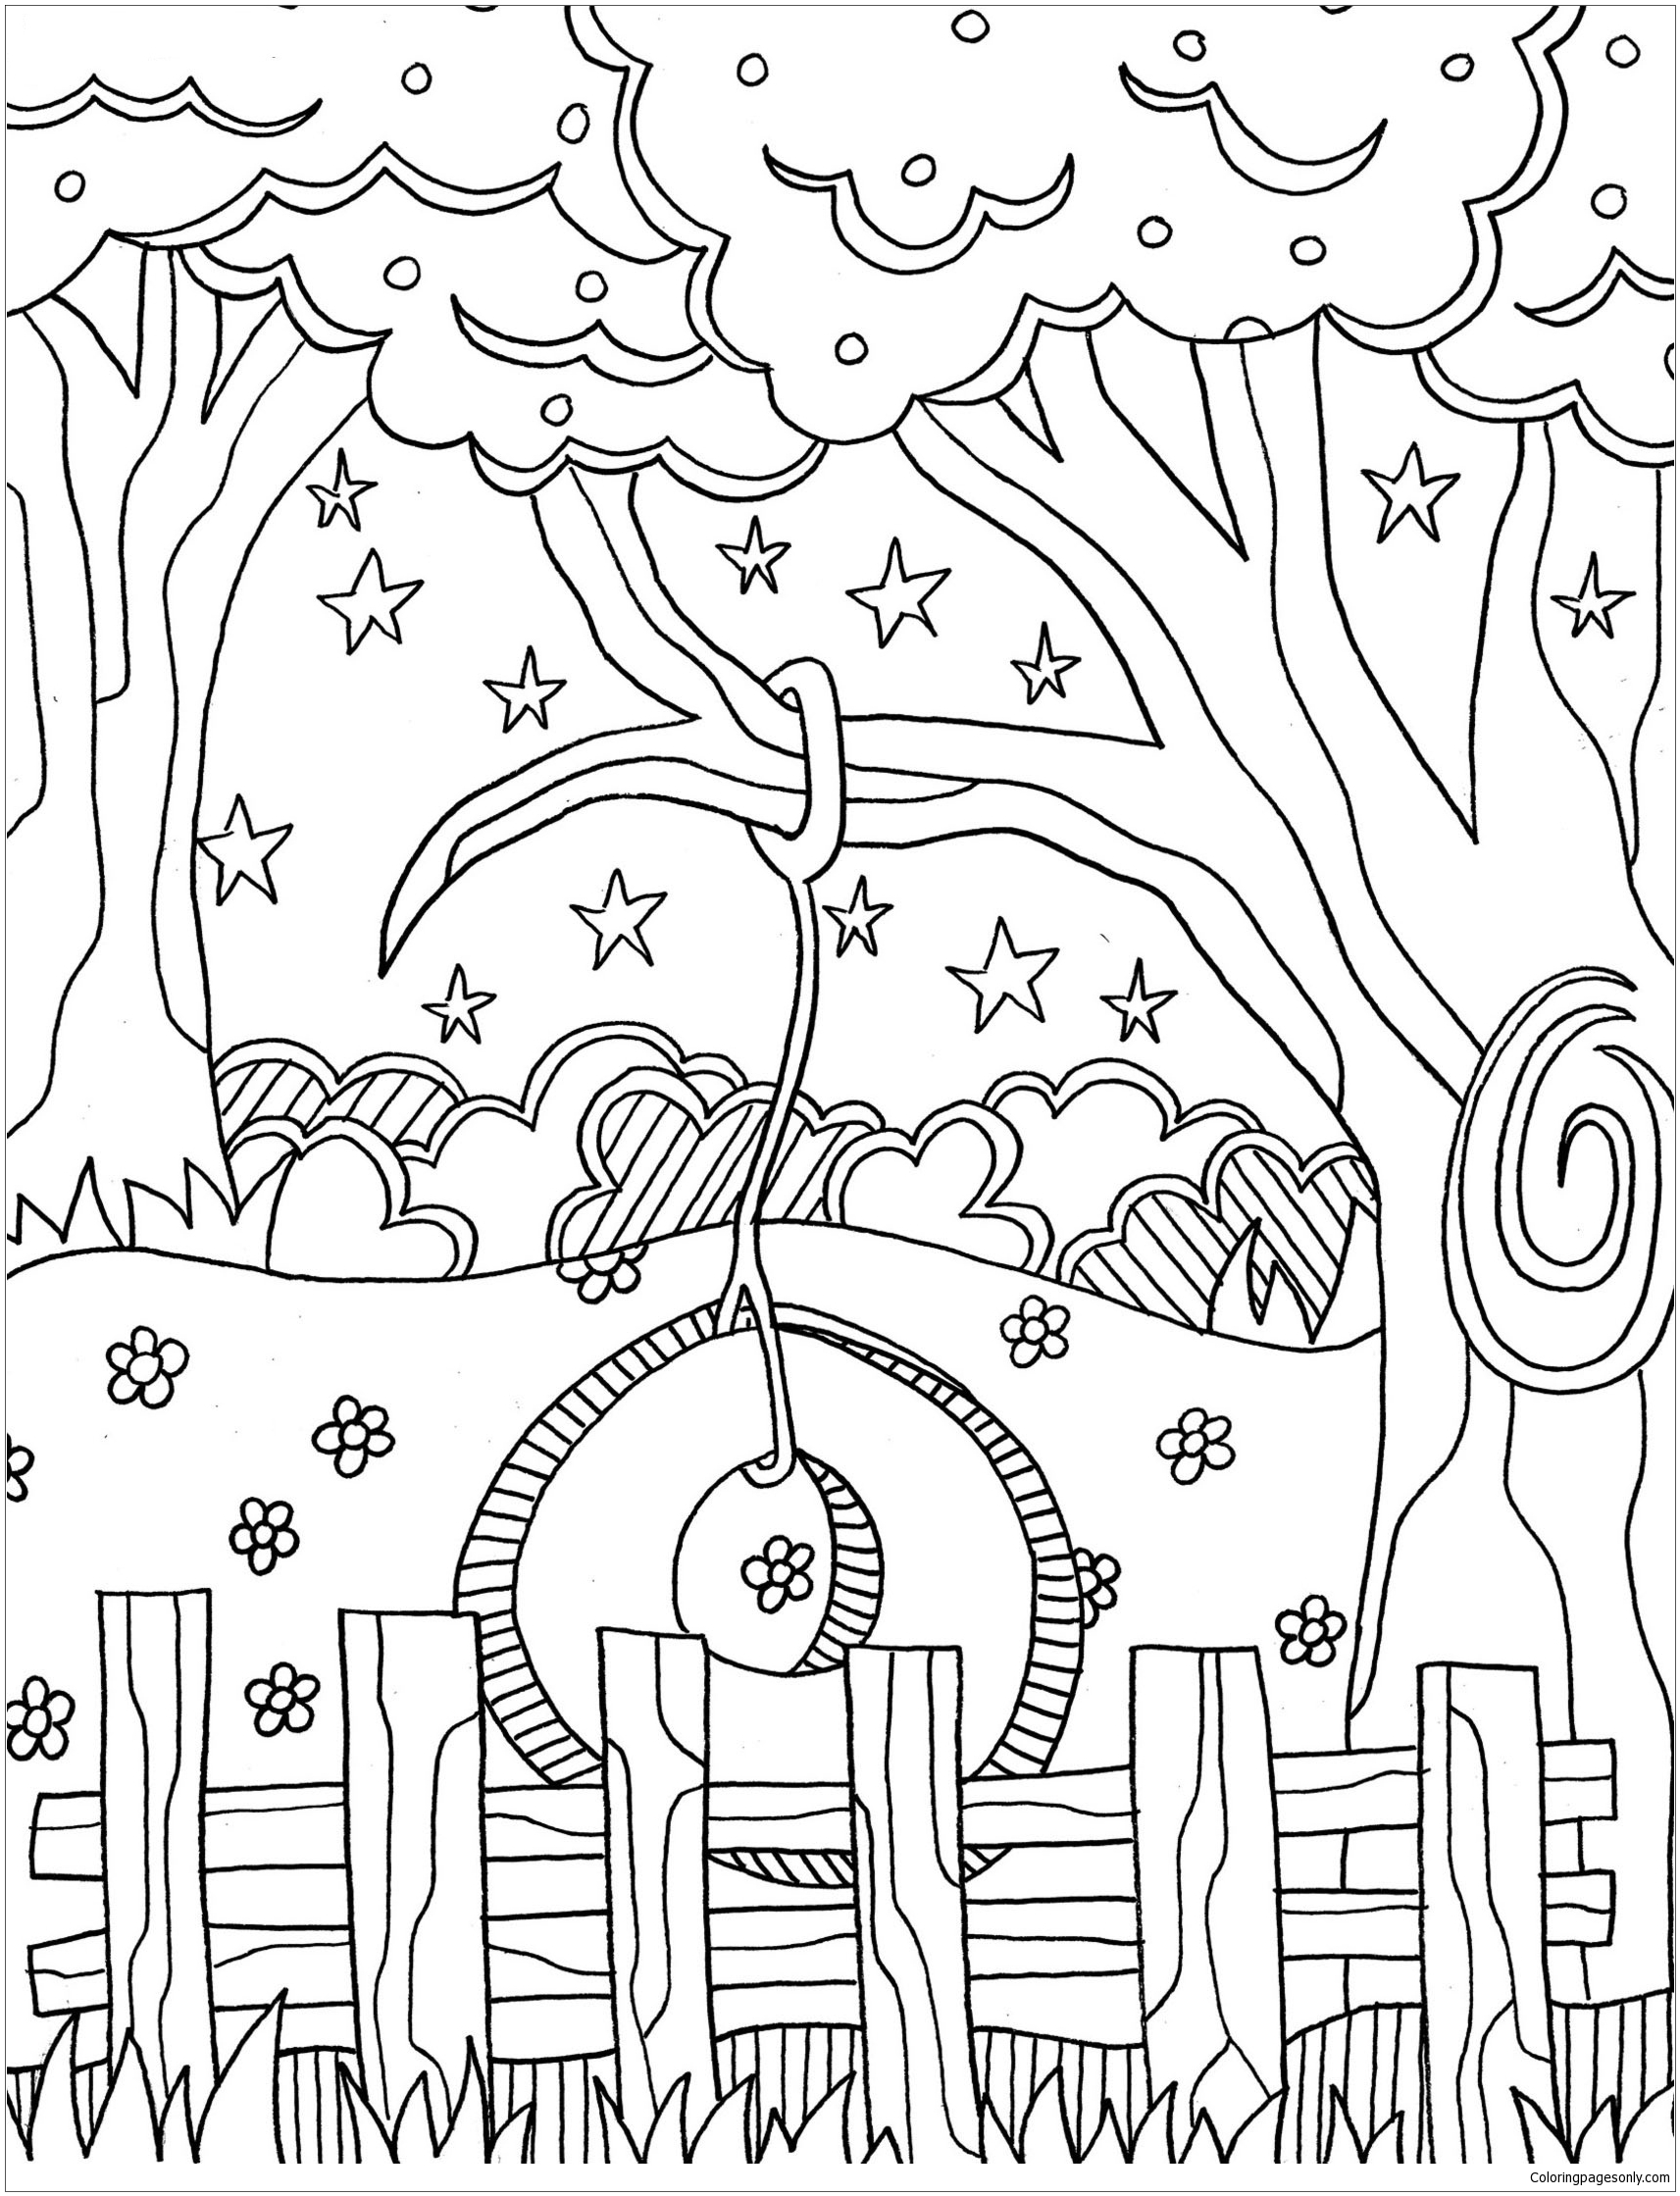 Tire Swing Coloring Pages